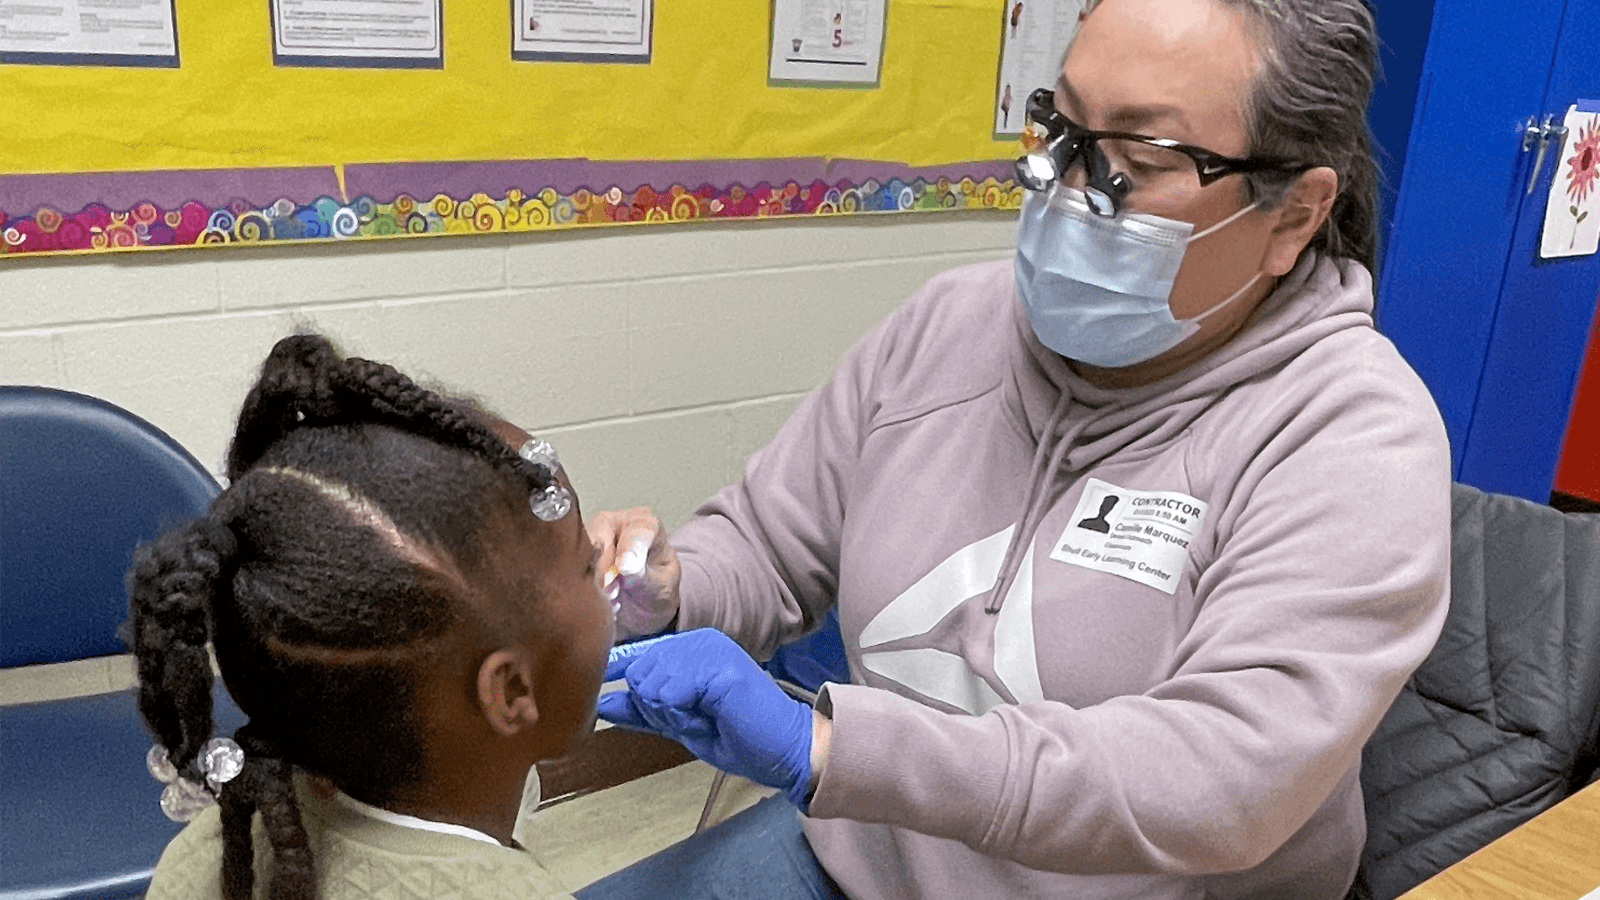 Free dental screenings and teledentistry services completed by Cass Community Health Foundation